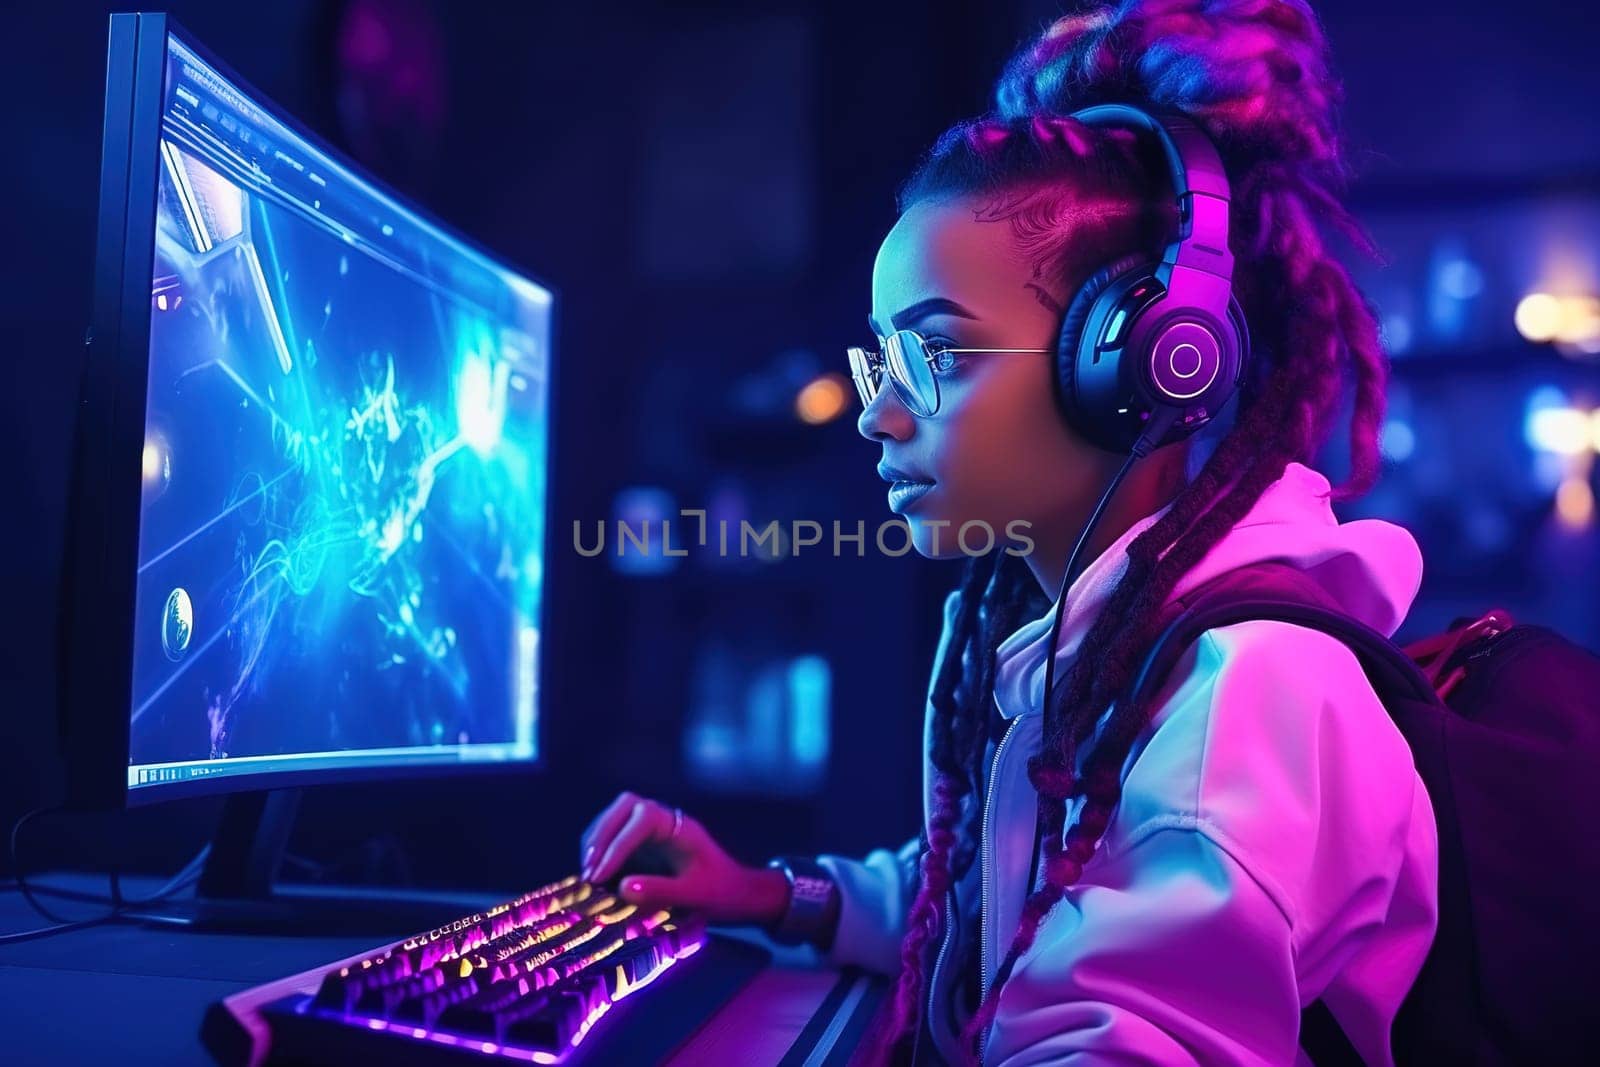 An African-American woman wearing headphones plays games on her computer. Neon light. by Yurich32